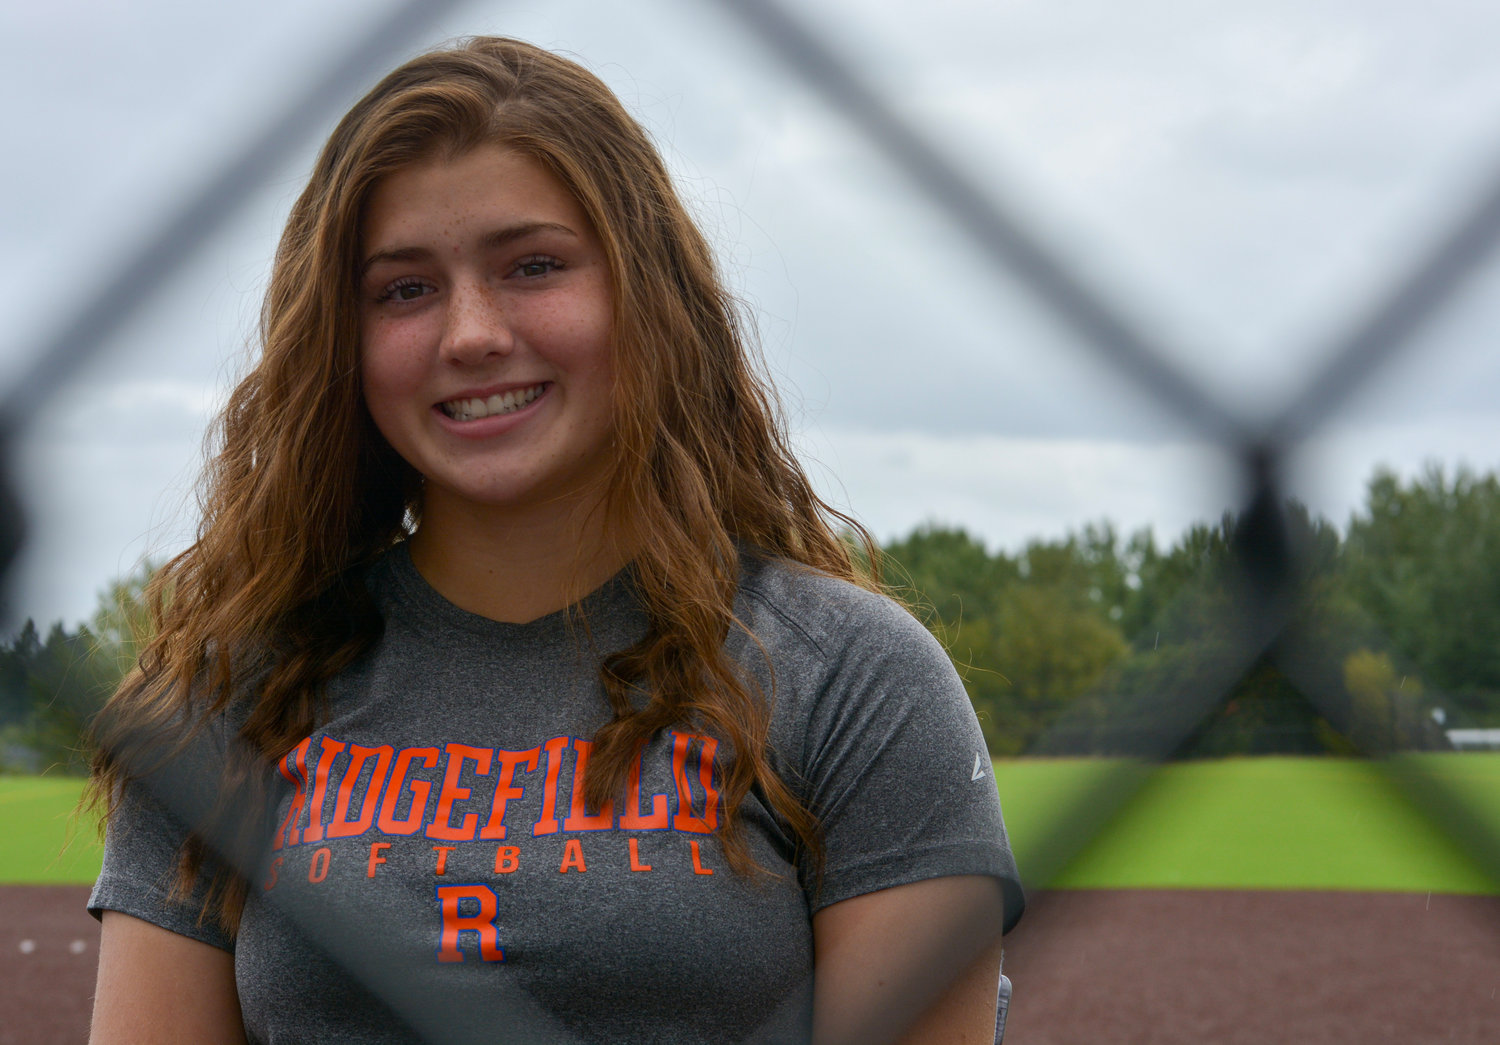 Elizabeth Peery, a sophmore at Ridgefield High School, doesn’t let her Type 1 diabetes stand in the way of her passion of playing softball.